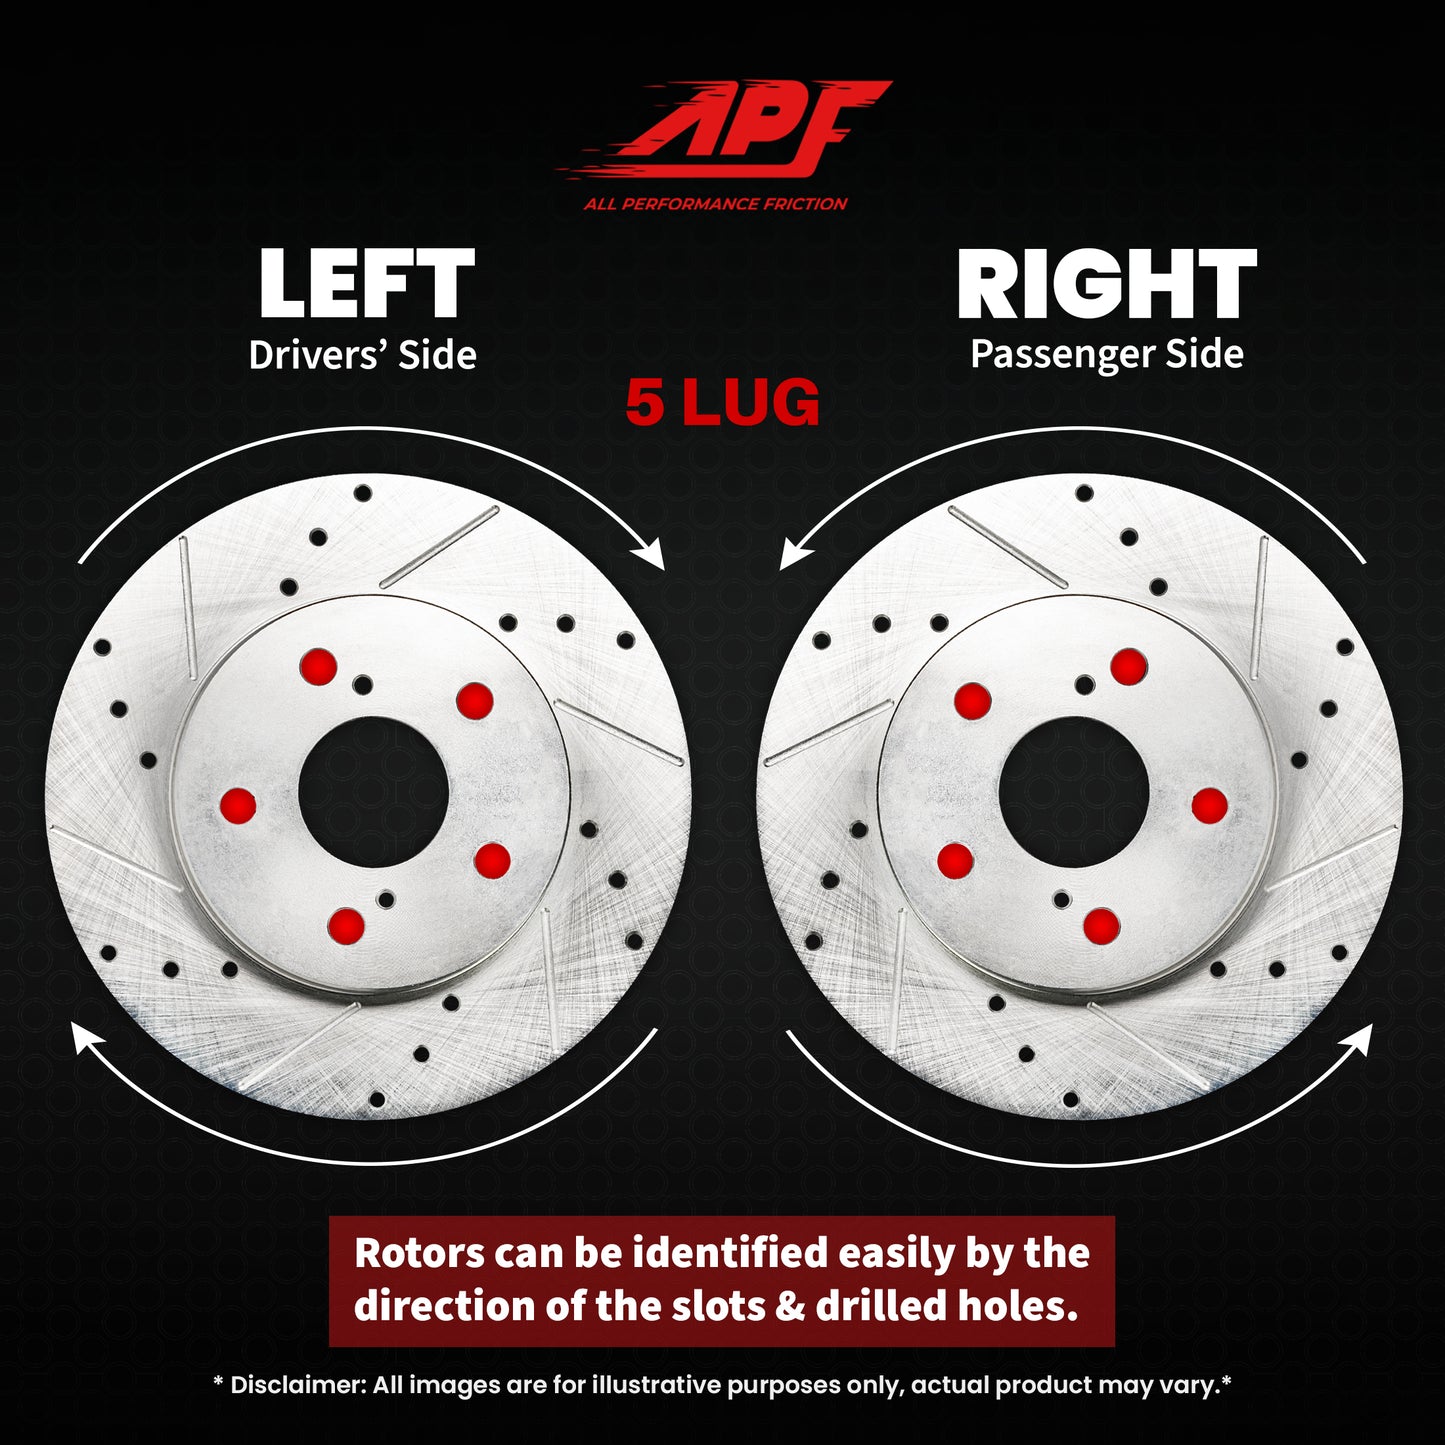 APF All Performance Friction Rear Rotors compatible with Kia Optima 2007-2010 Zinc Drilled Slotted Rotors | $94.66